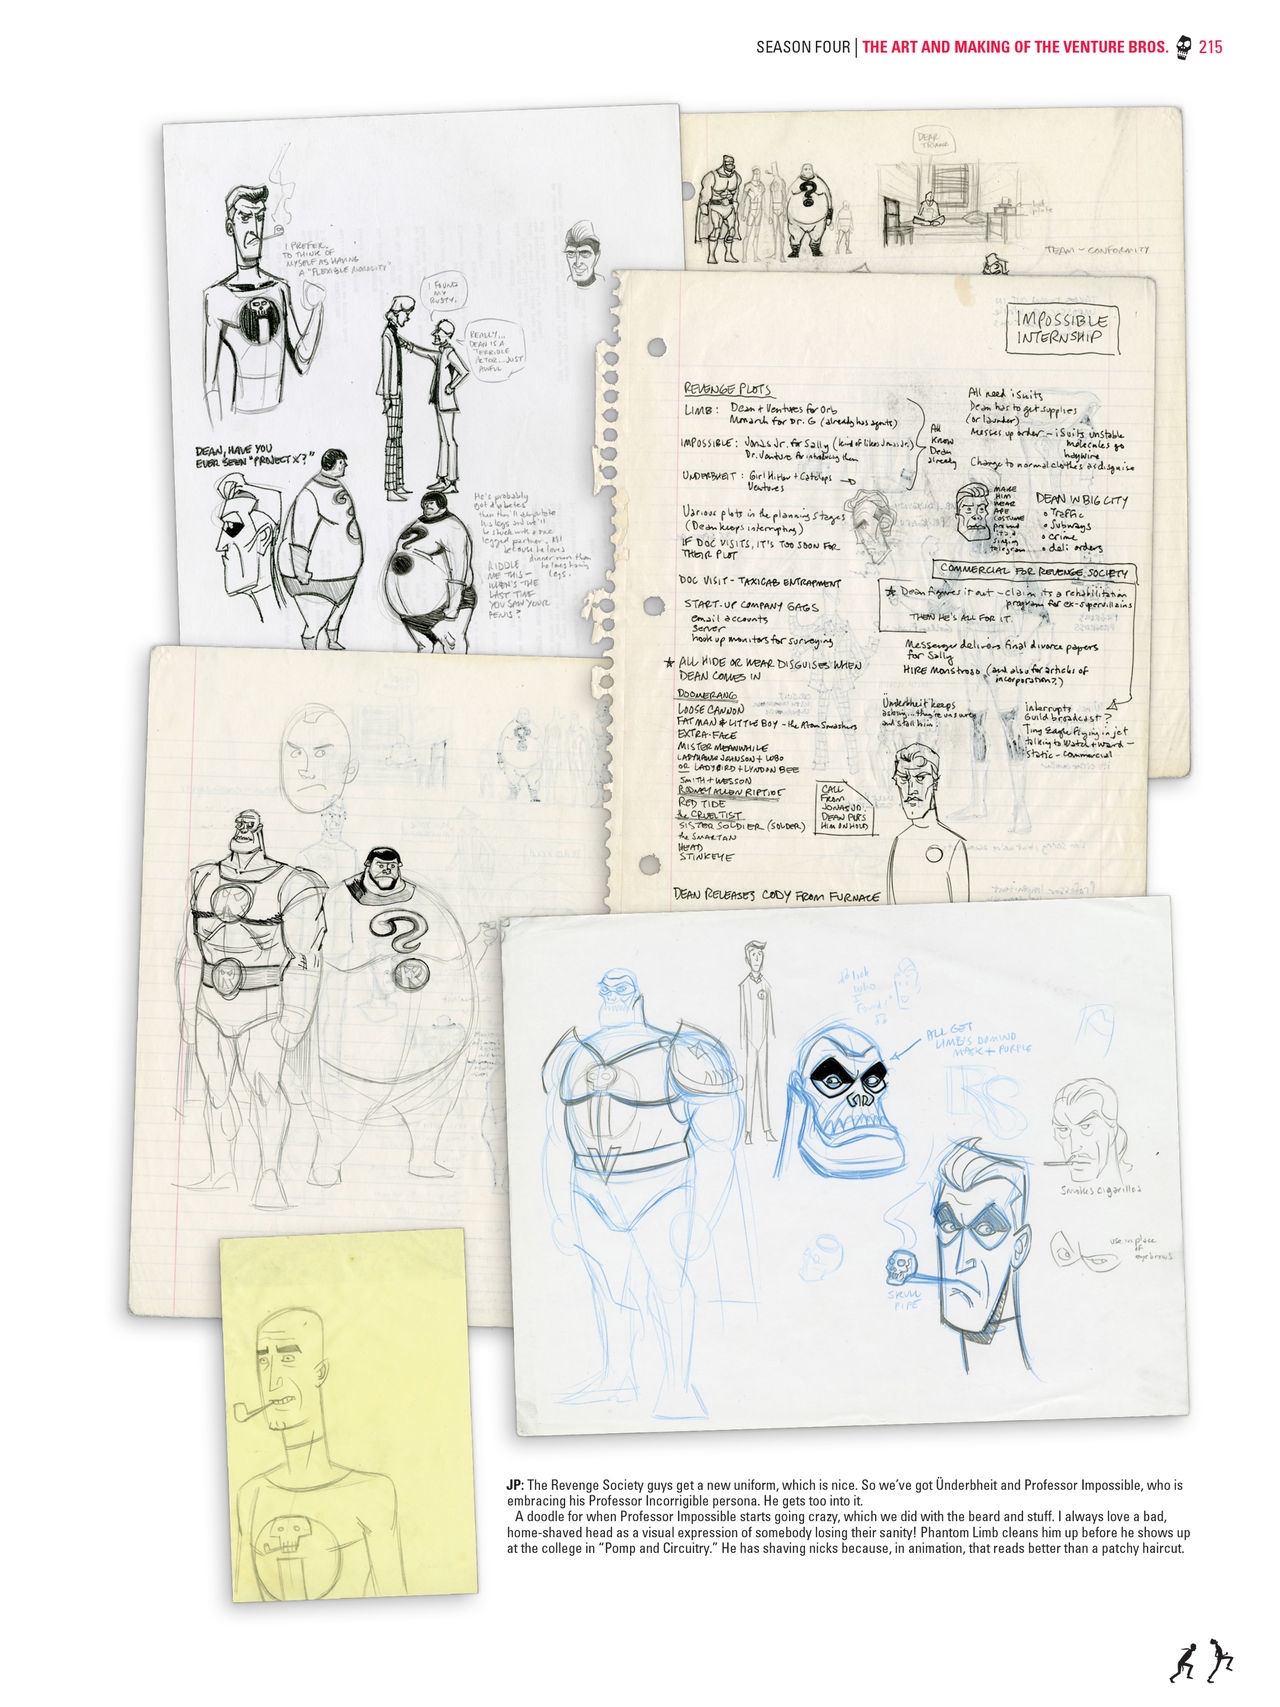 Go Team Venture! - The Art and Making of the Venture Bros 213